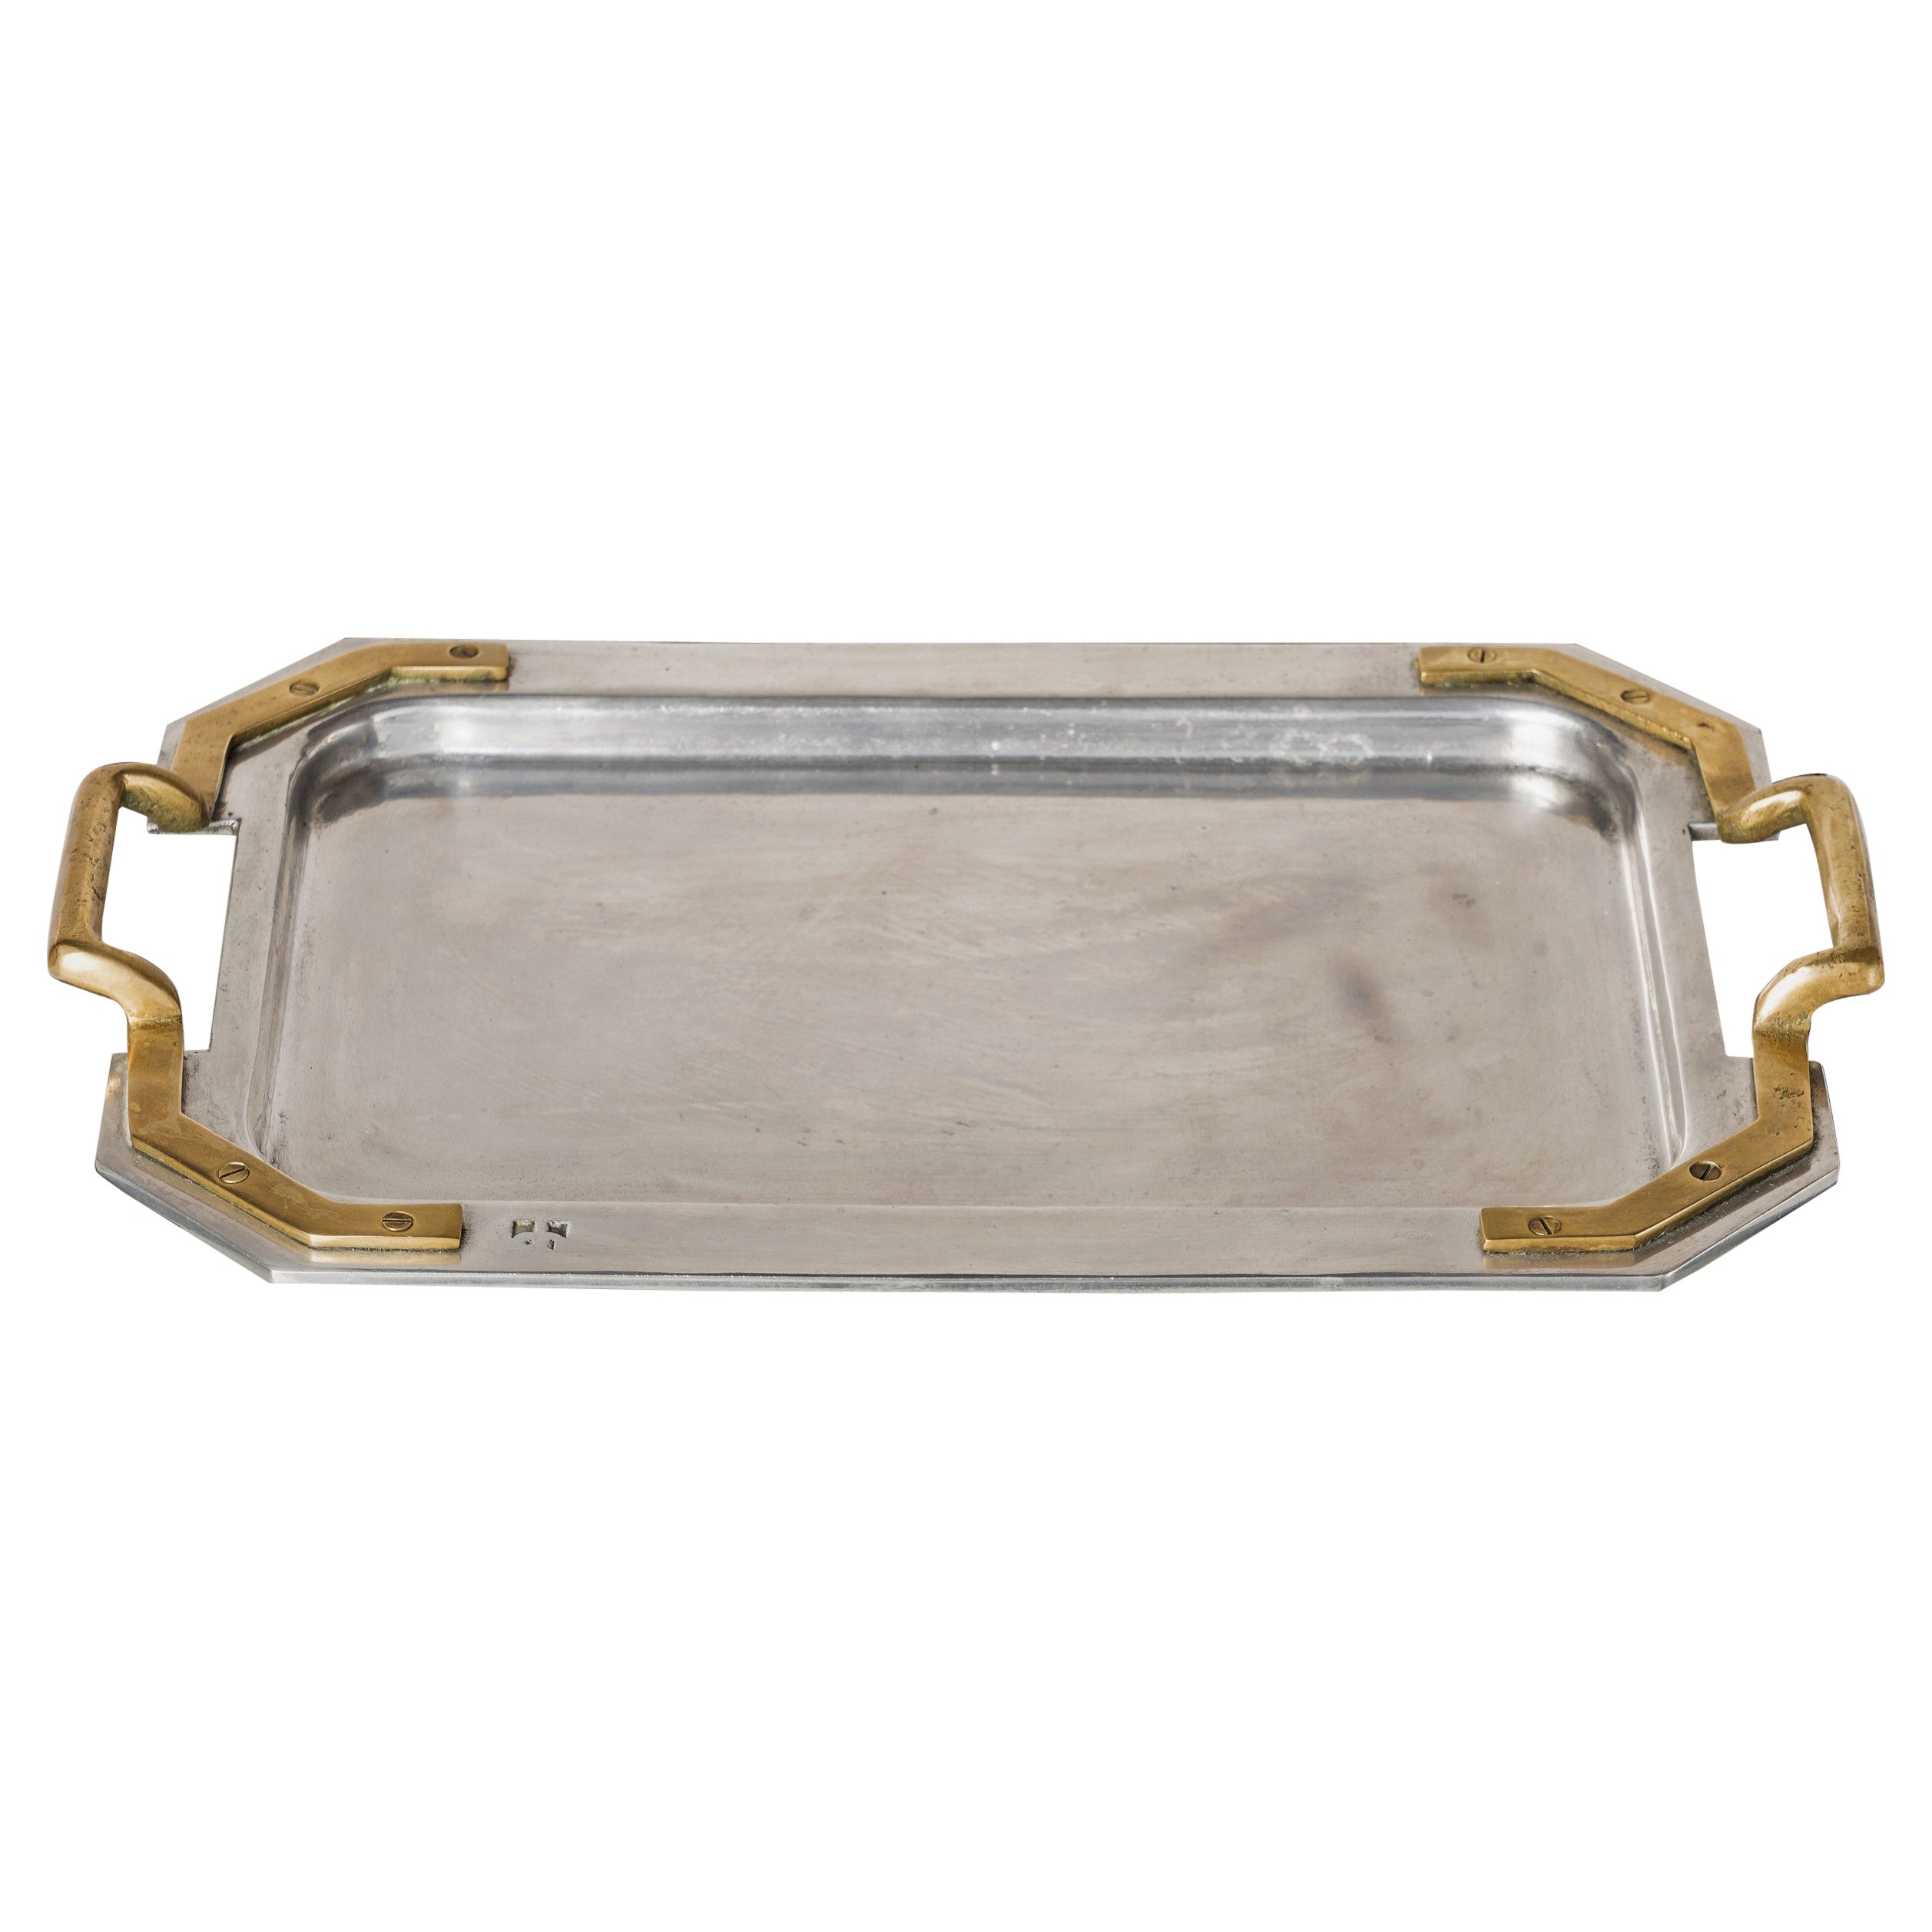 Signed Brutalist Cast Steel & Bronze Tray by David Marshall - Spain 1970's For Sale